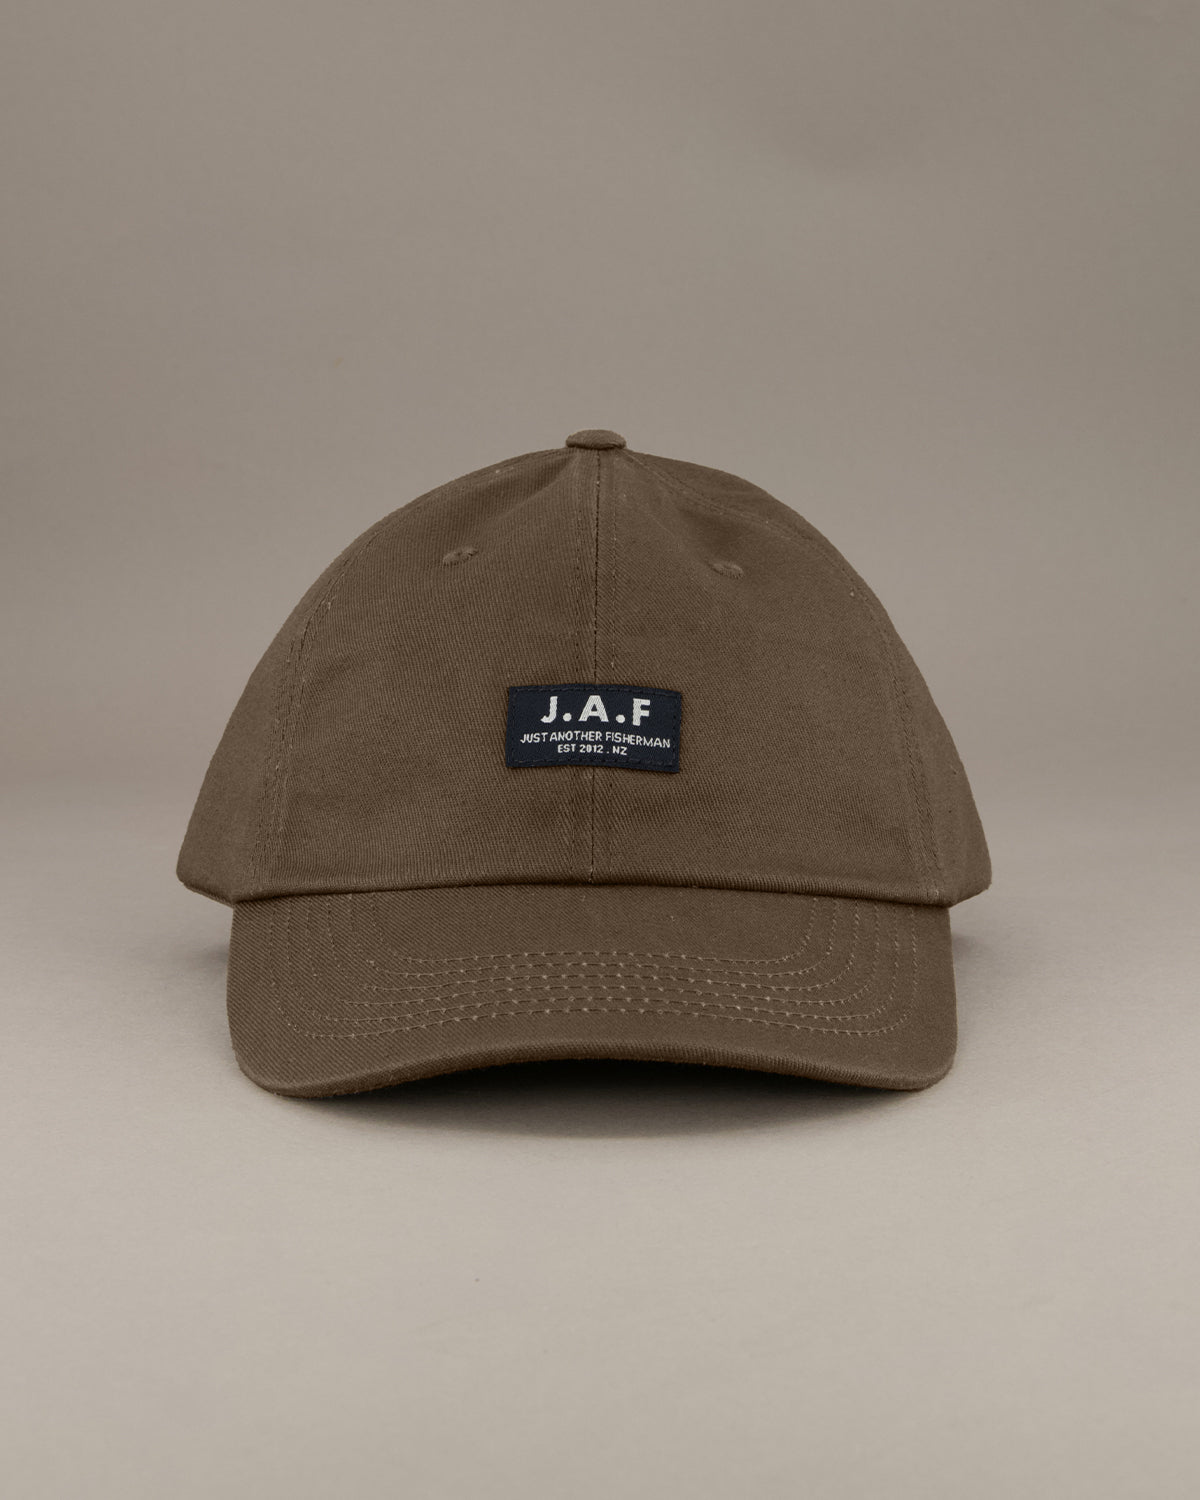 Just Another Fisherman J.A.F Cap - Grey